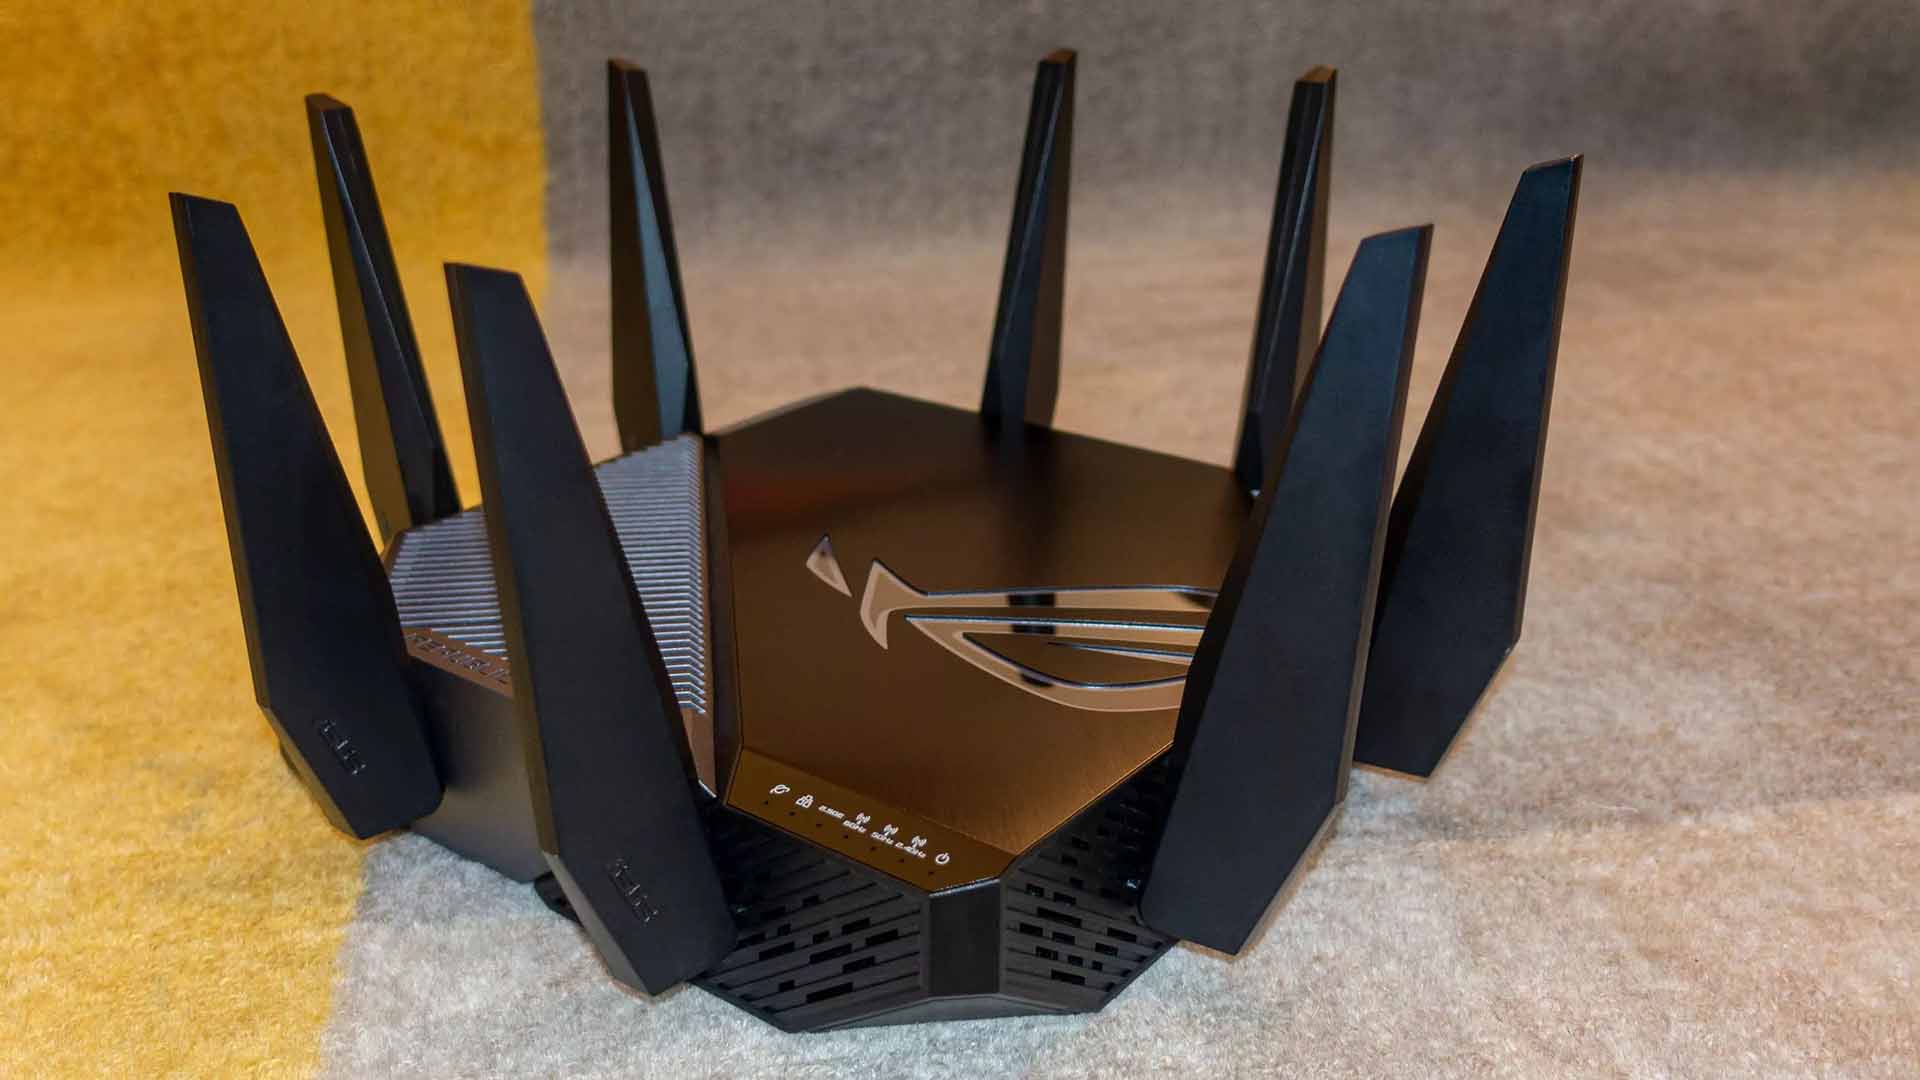 Cyclops Blink is actively attacking and exploiting Asus routers